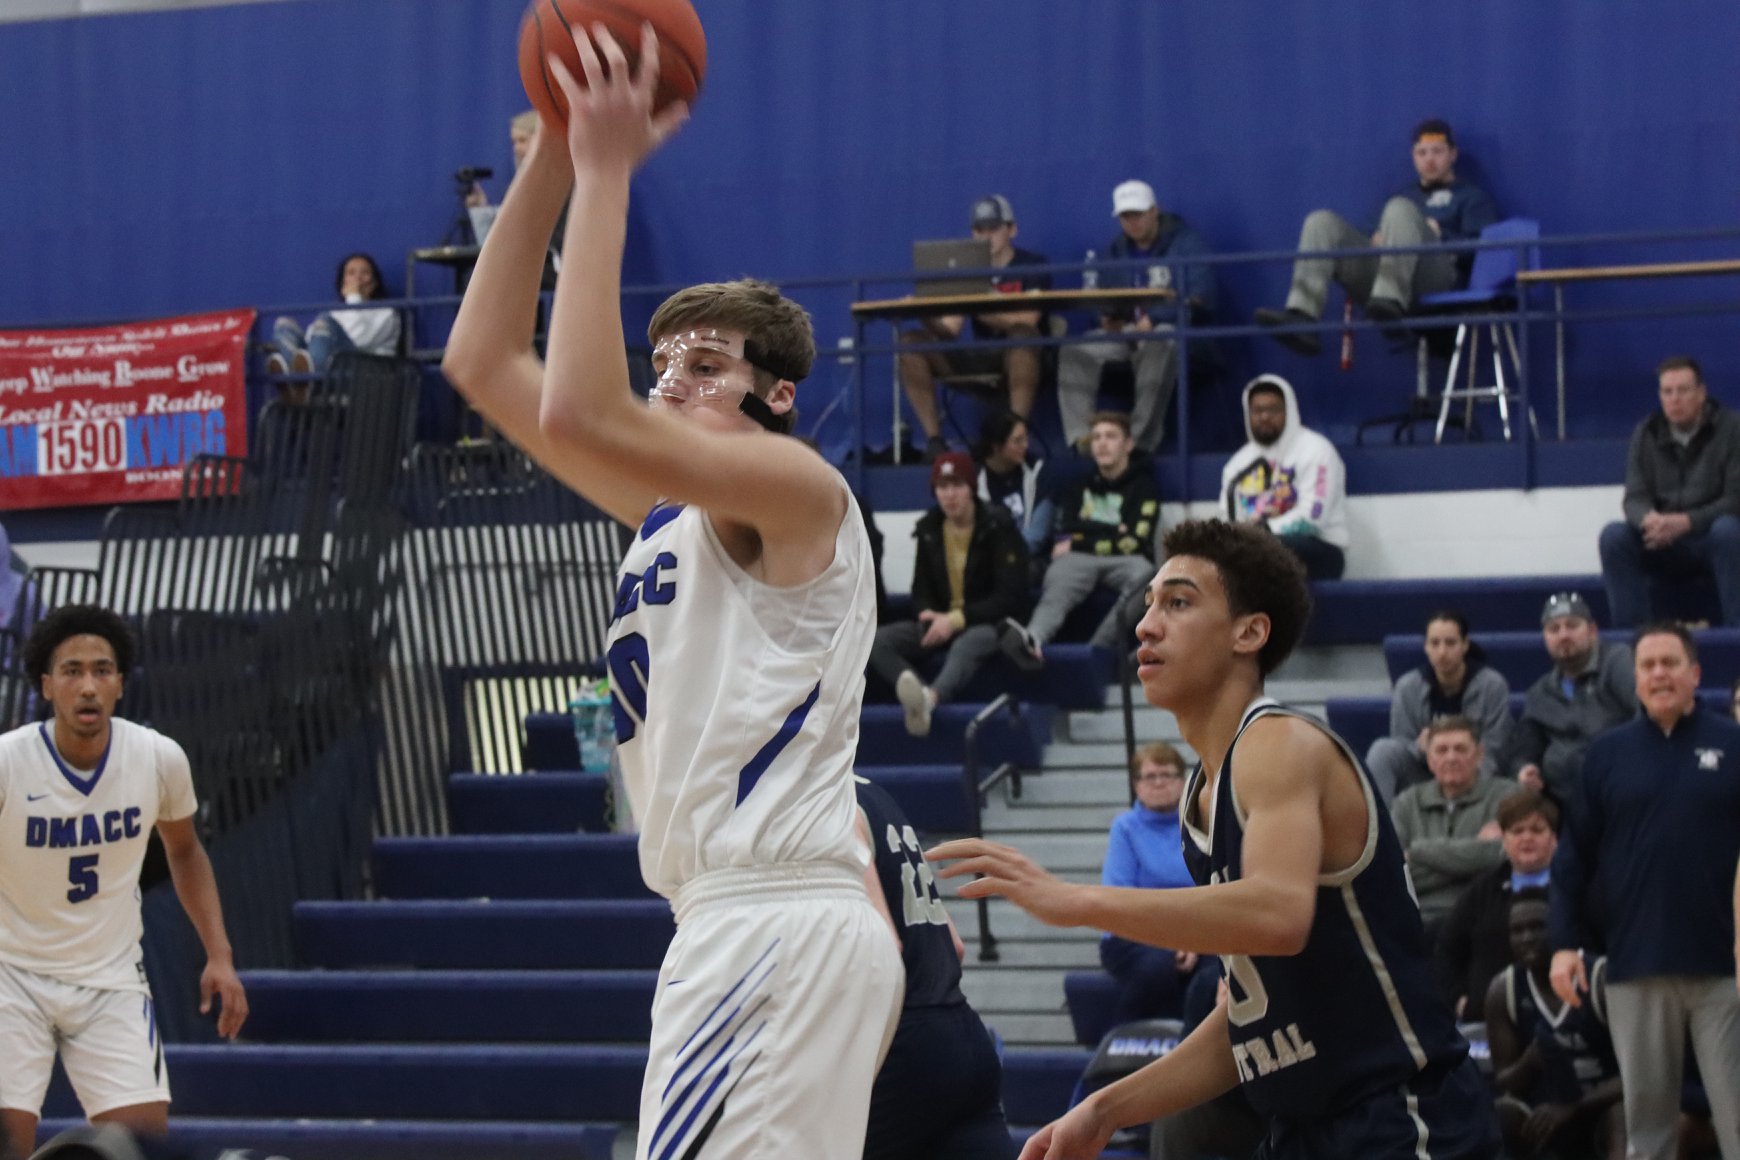 DMACC men's basketball team tops SWCC. 76-55; clinches tie for ICCAC regular-season championship